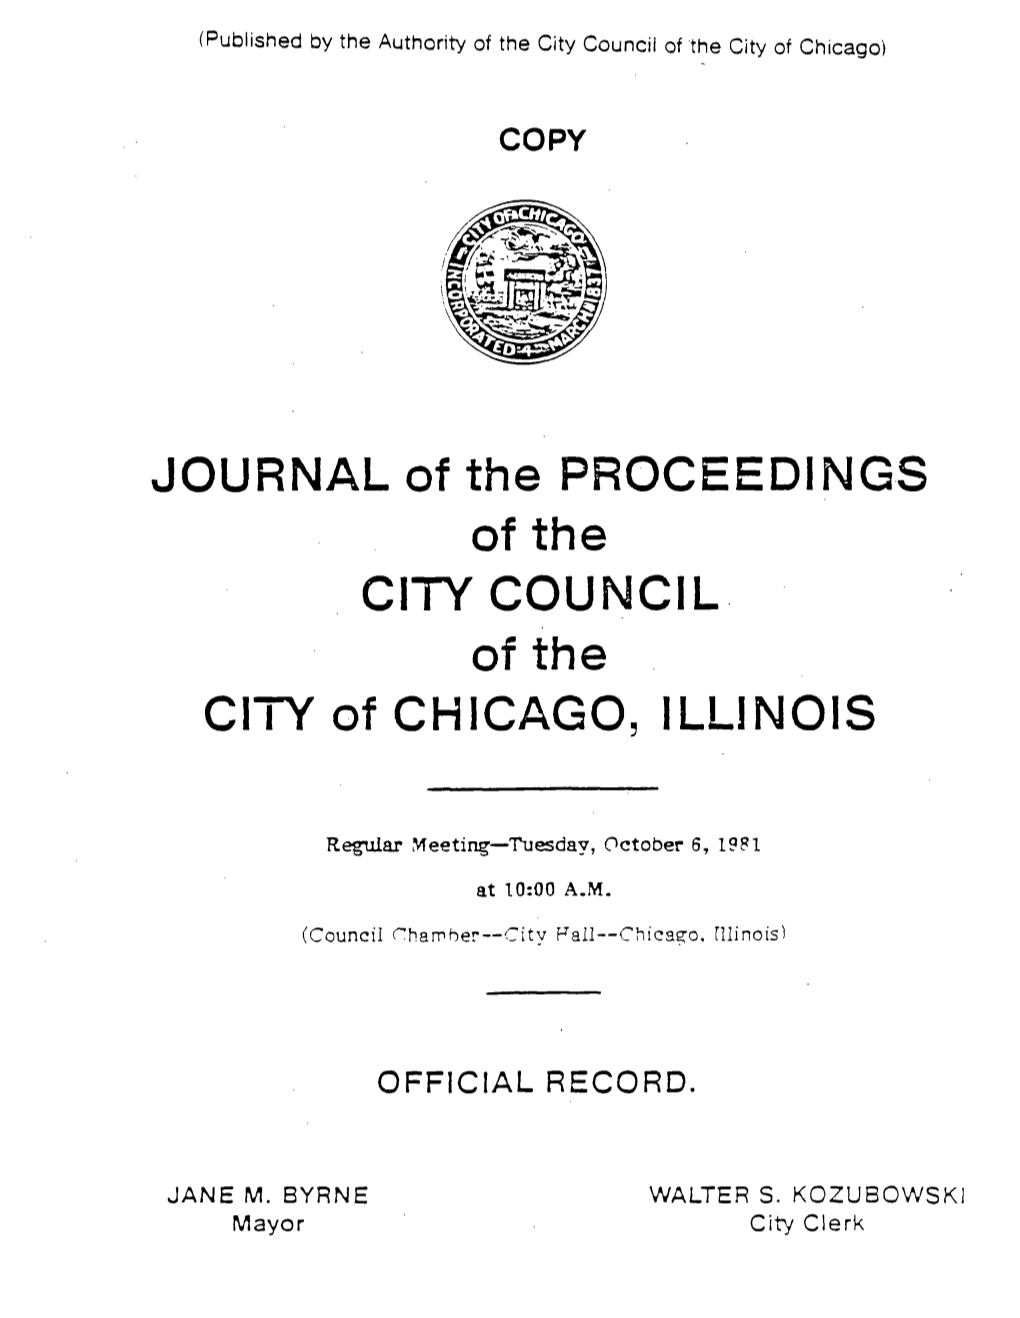 JOURNAL of the PROCEEDINGS of the CITY COUNCIL of the Cityof CHICAGO, ILLINOIS